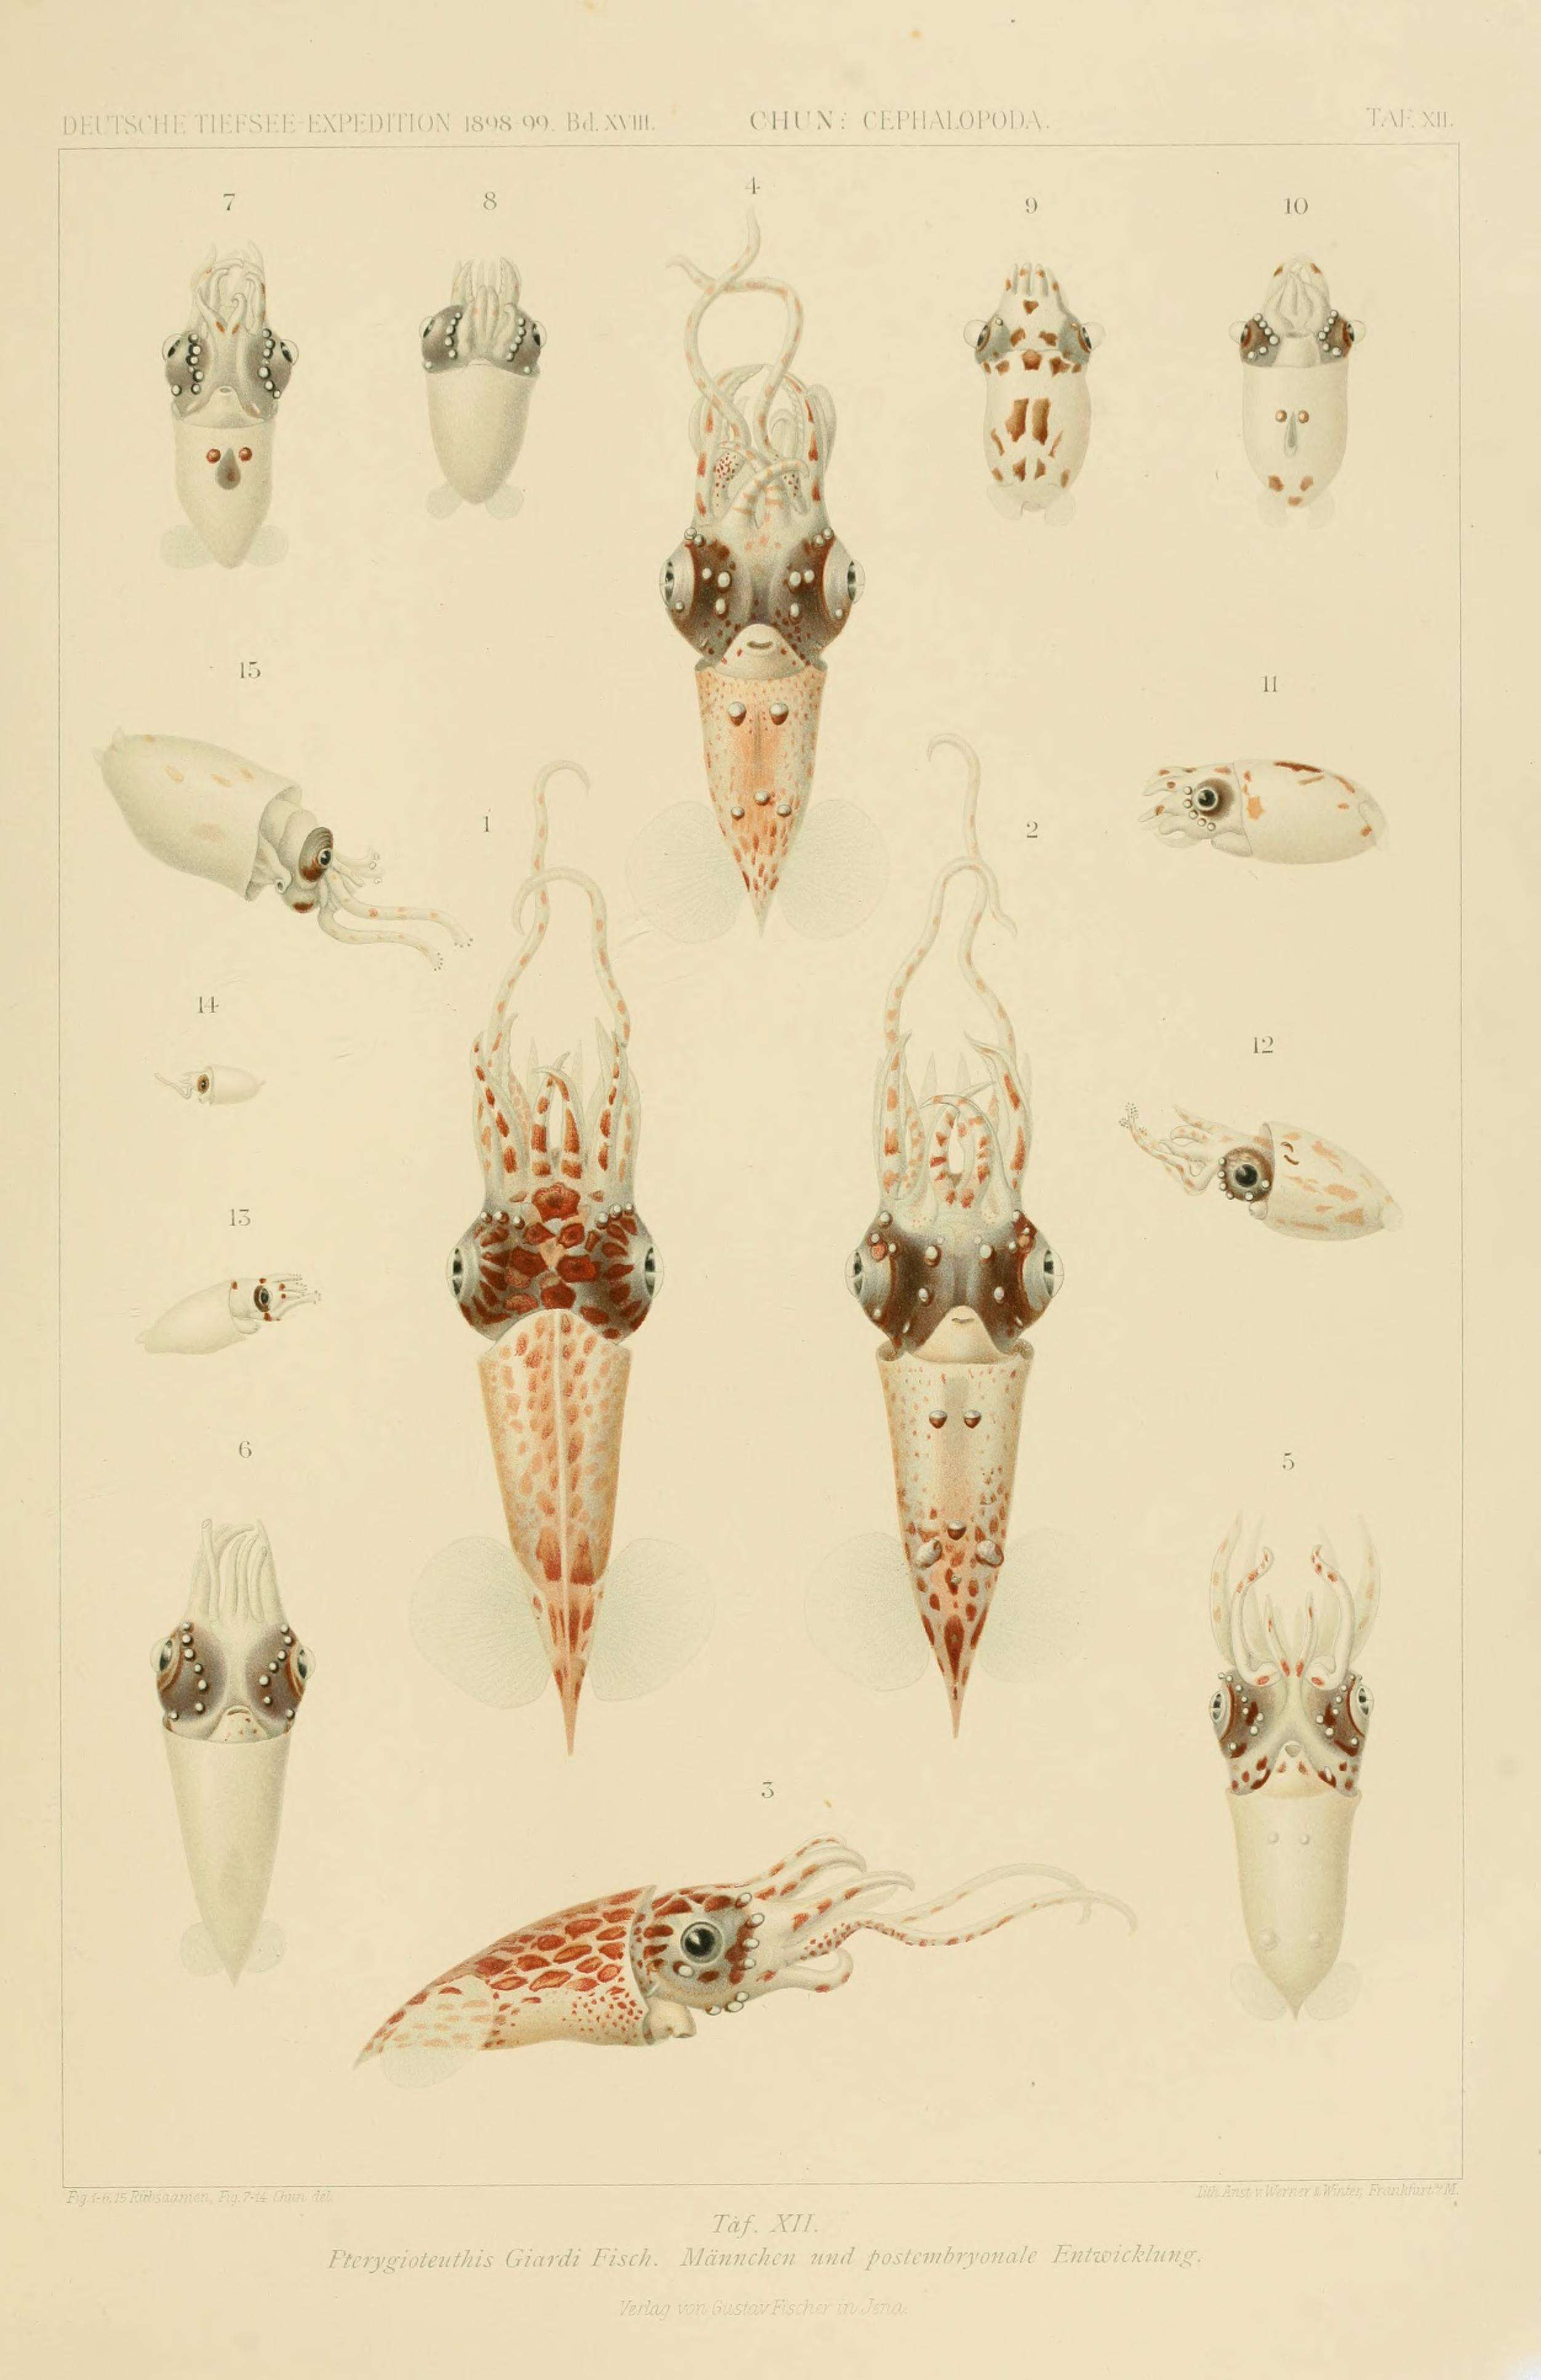 Image of roundear enope squid